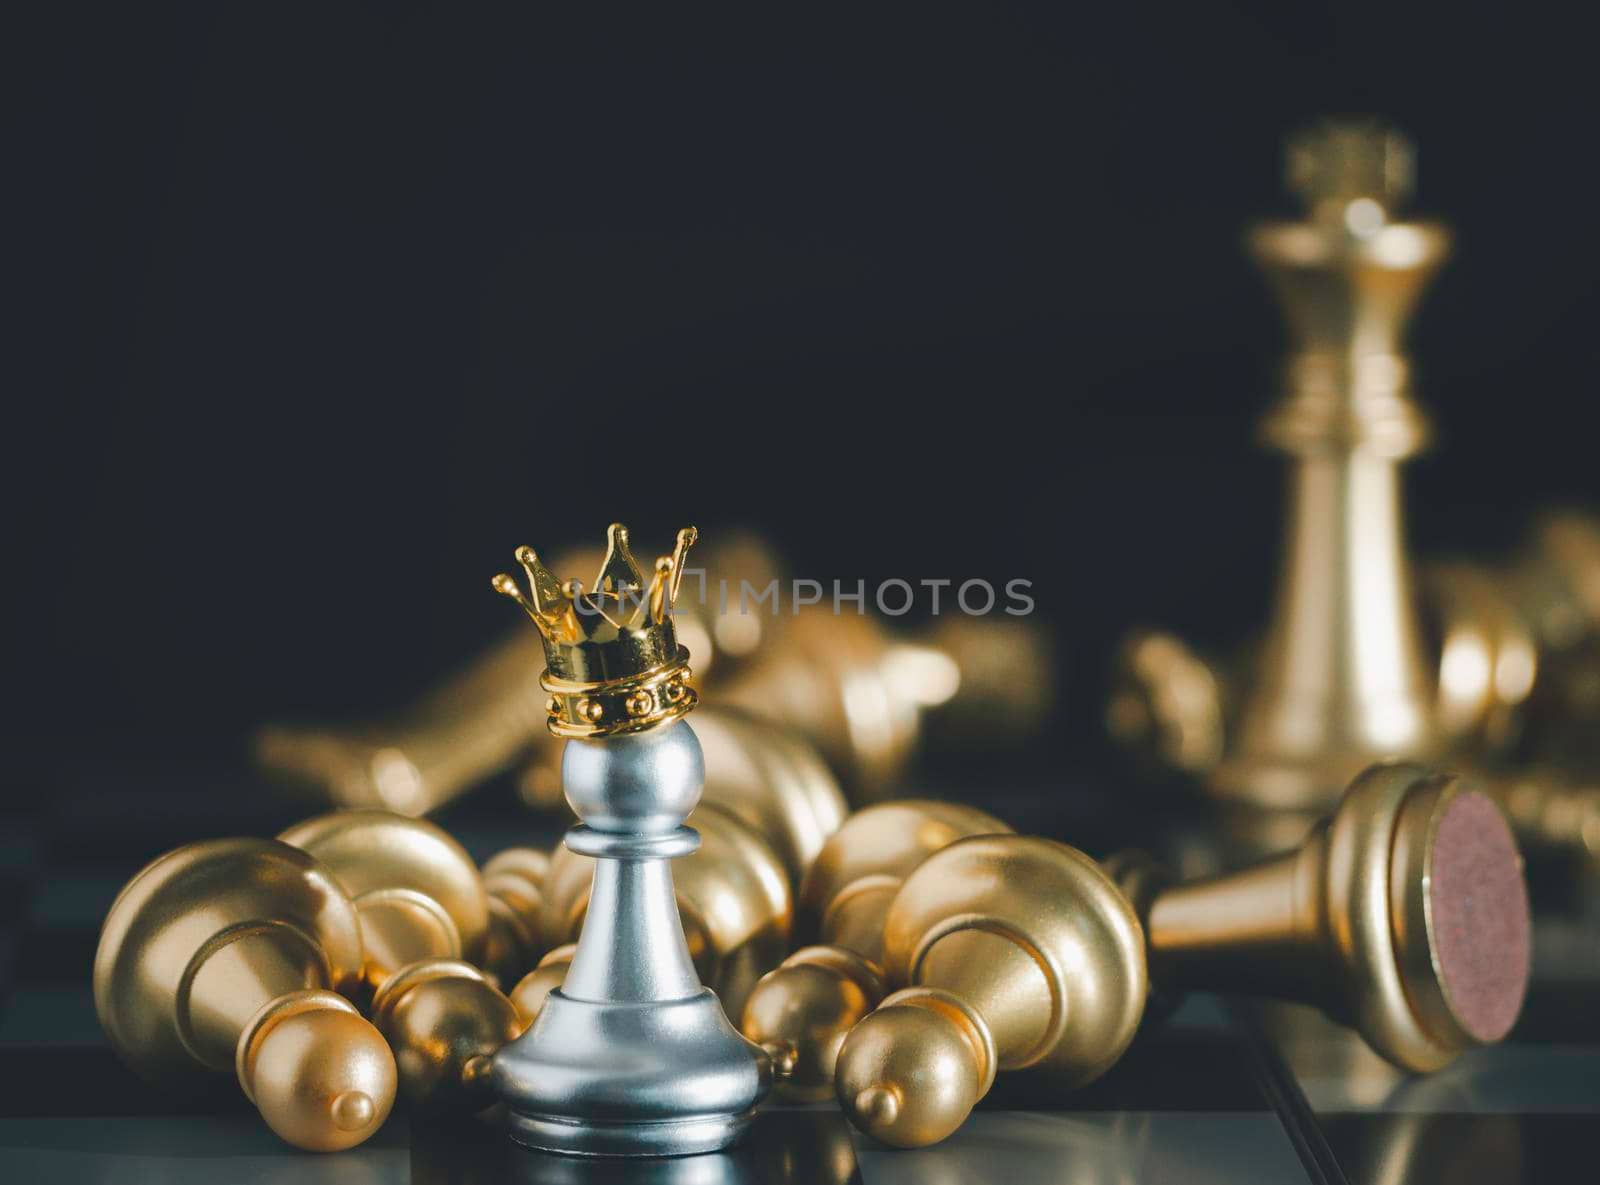 A silver pawn standing crowned in battle chess game on board with gold chess background. To fighting with teamwork to victory, business strategy concept and leader and teamwork concept for success.